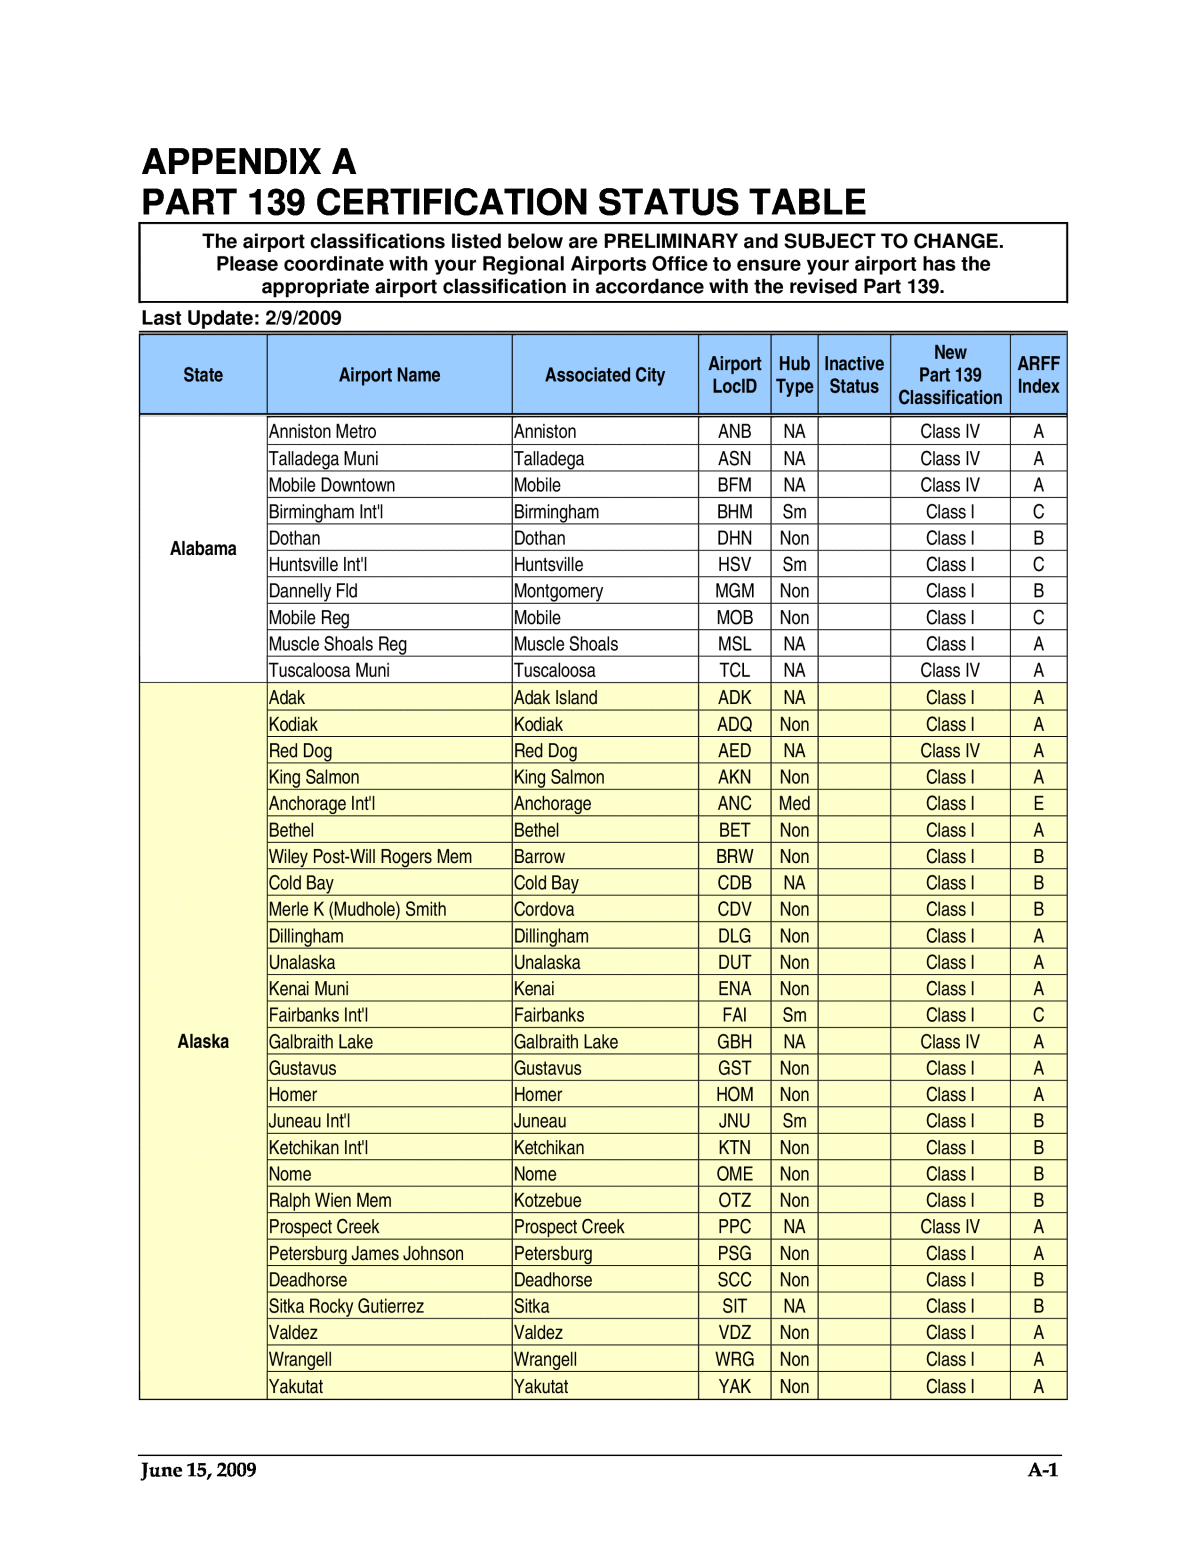 Appendix A: Part 139 Certification Status Table How Proposed ARFF